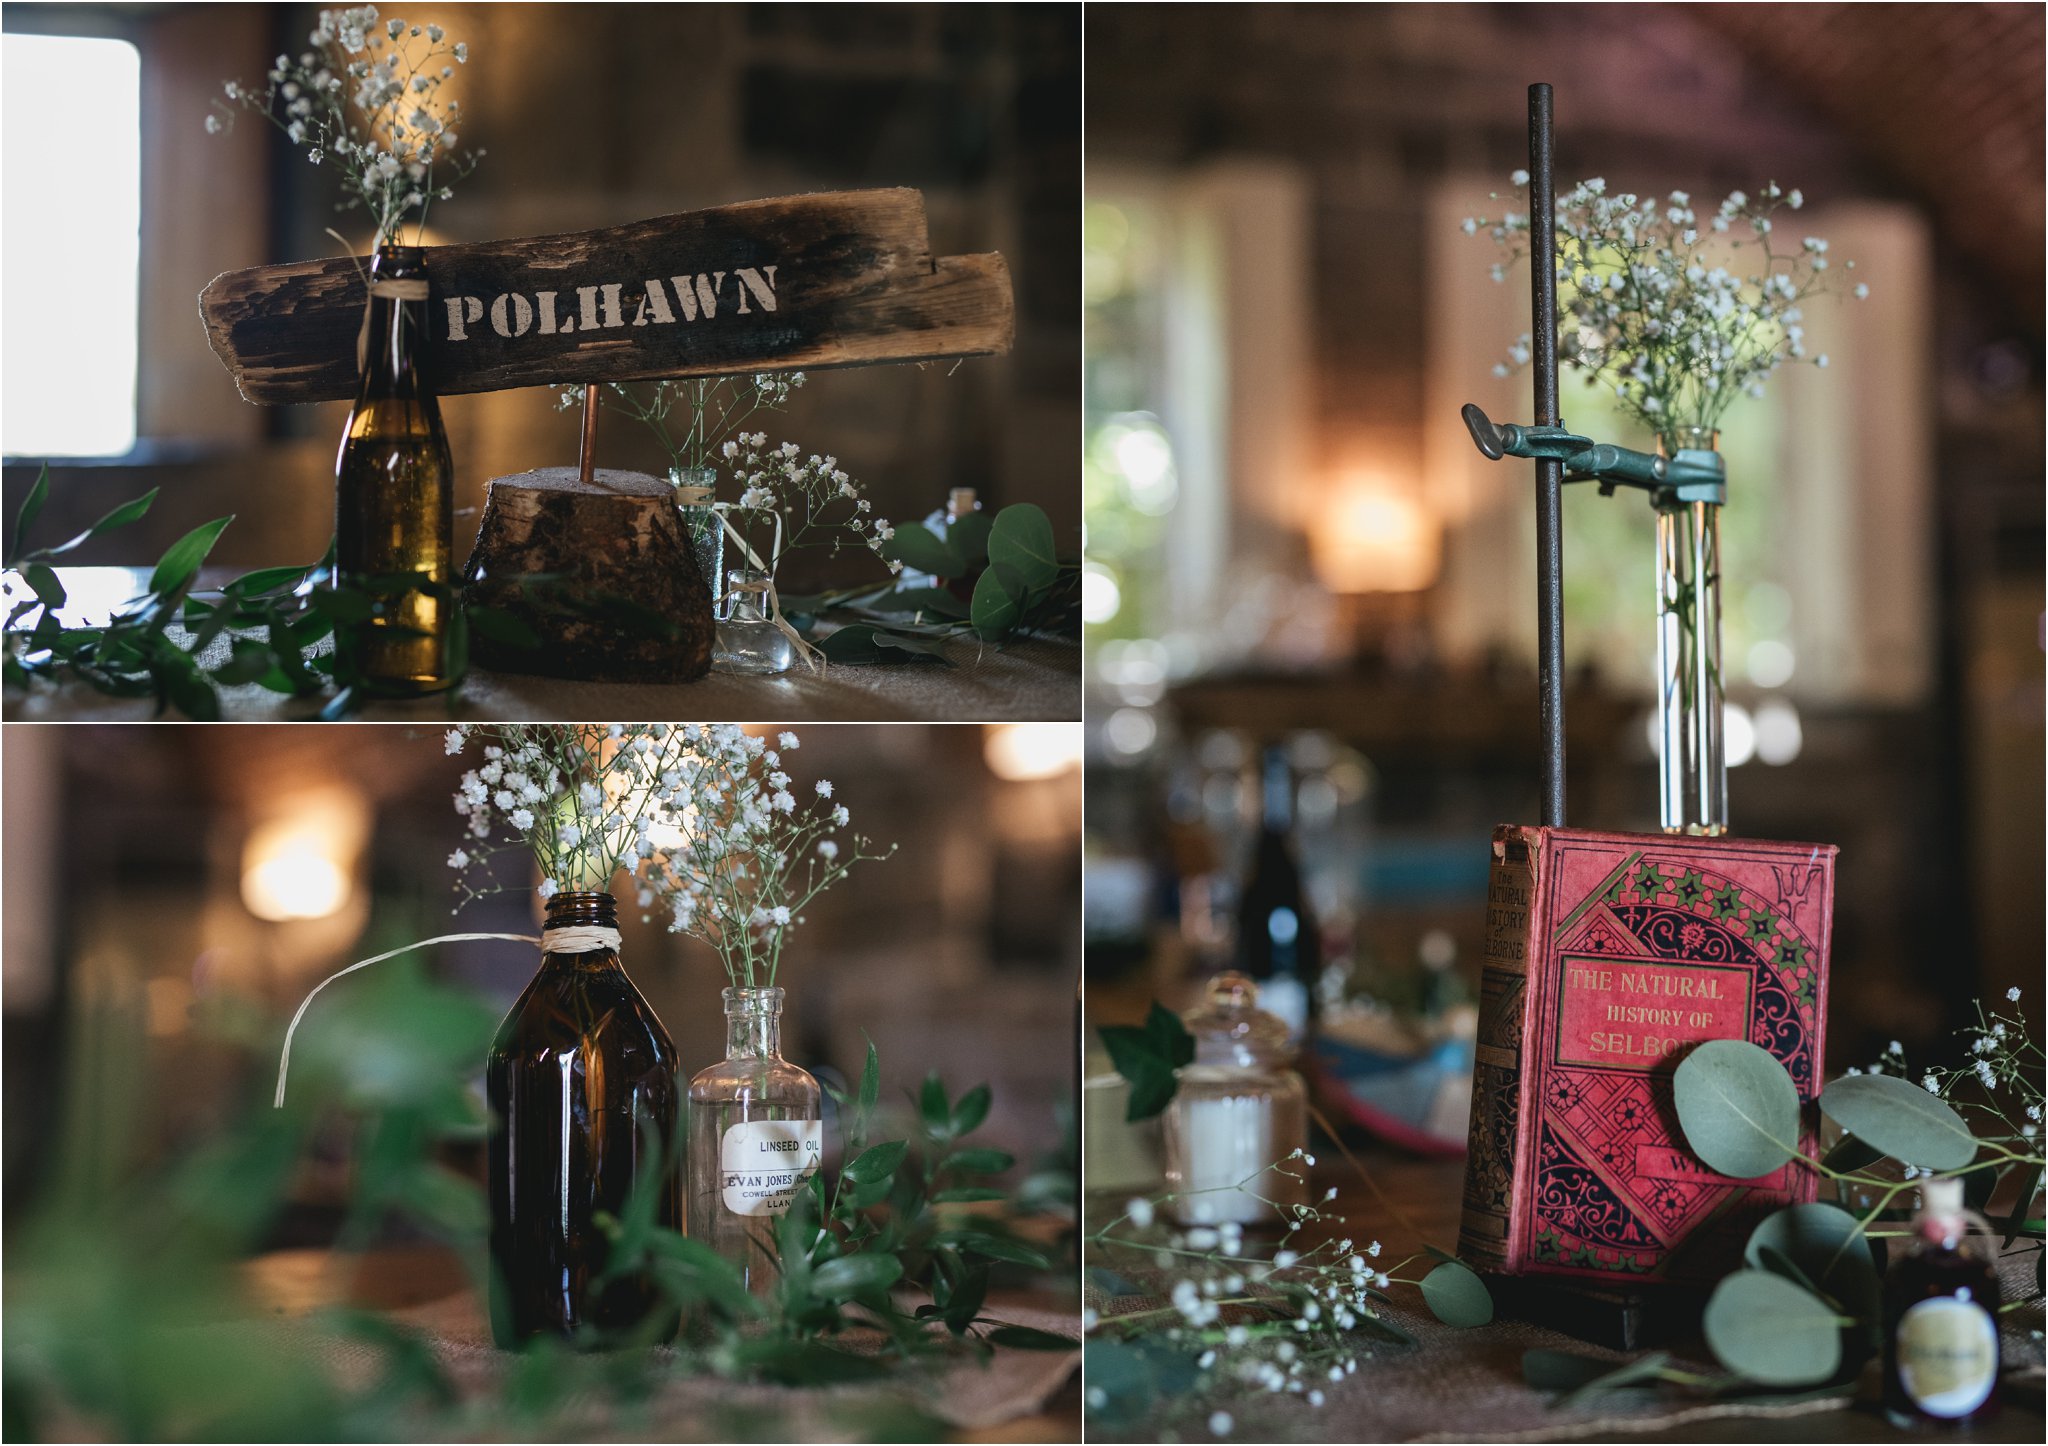 Rustic decorations for wedding tables